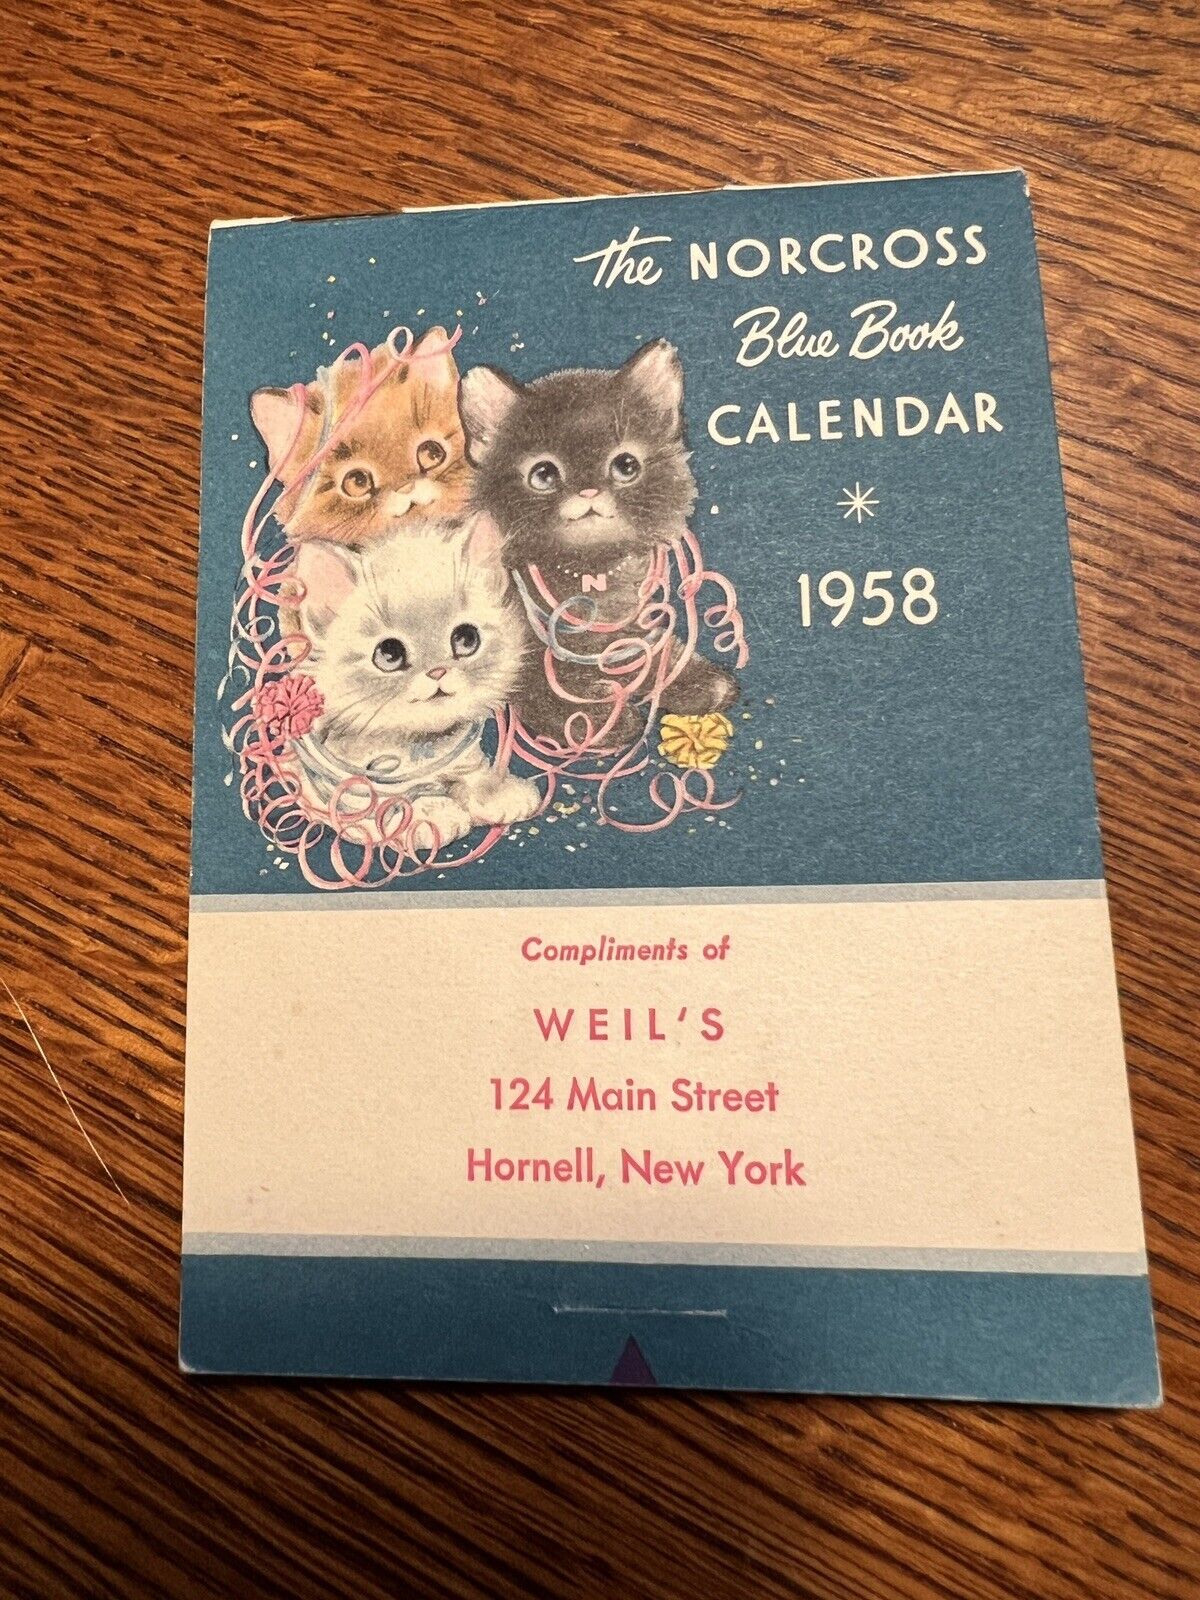  NORCROSS Blue Book Calendar Easel Style 1958 Compliments of Weil\'s Hornell NY